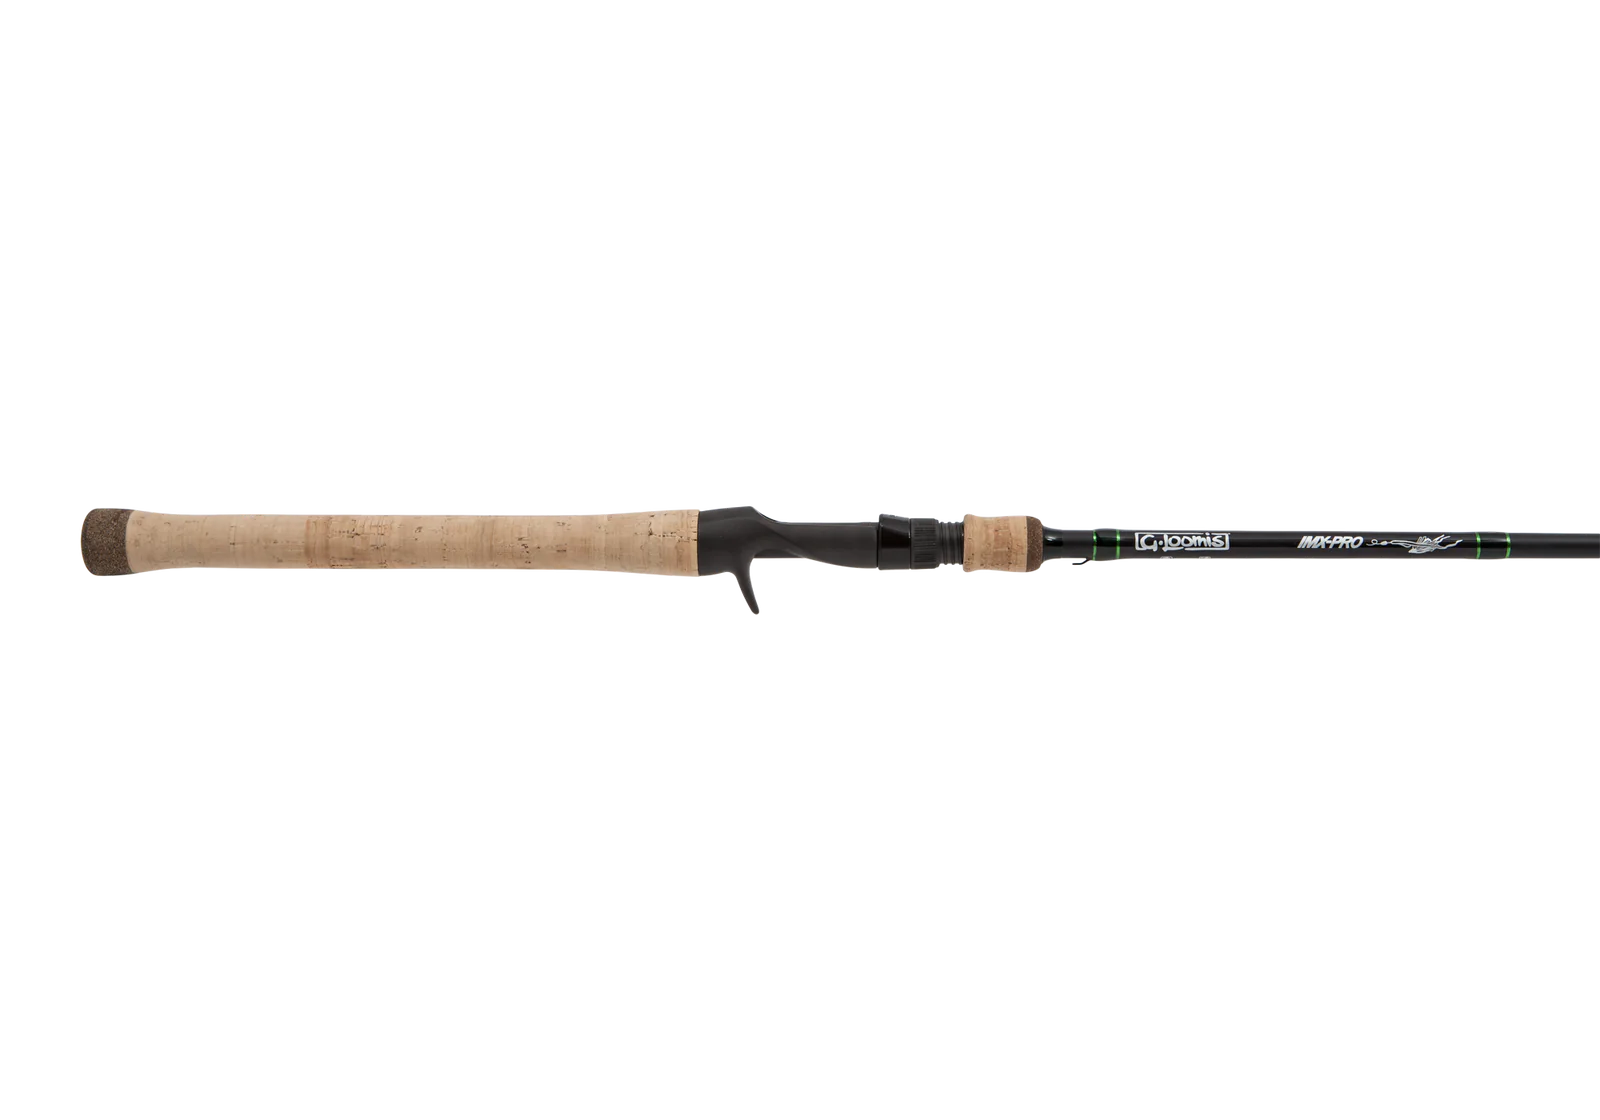 G.Loomis IMX-Pro Casting Rod 843C MBR (Mag Bass)